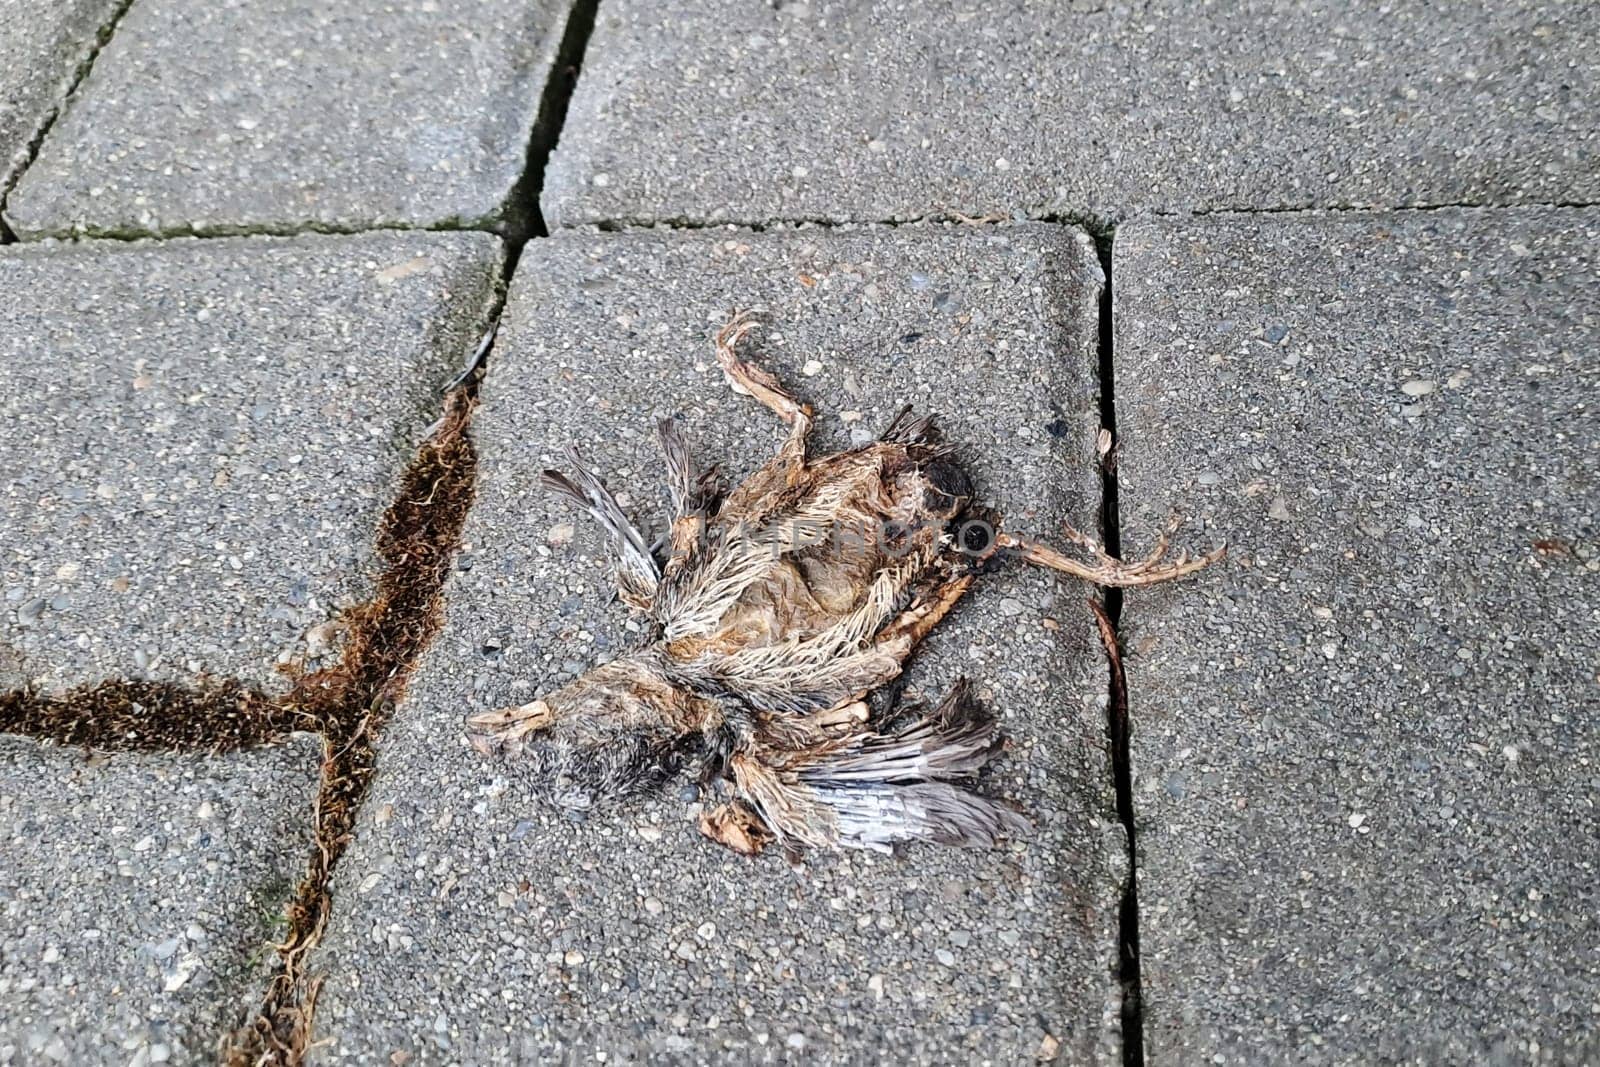 Baby bird that will never fly. Very young chick, fallen from nest. Dead on pavement. by Zelenin